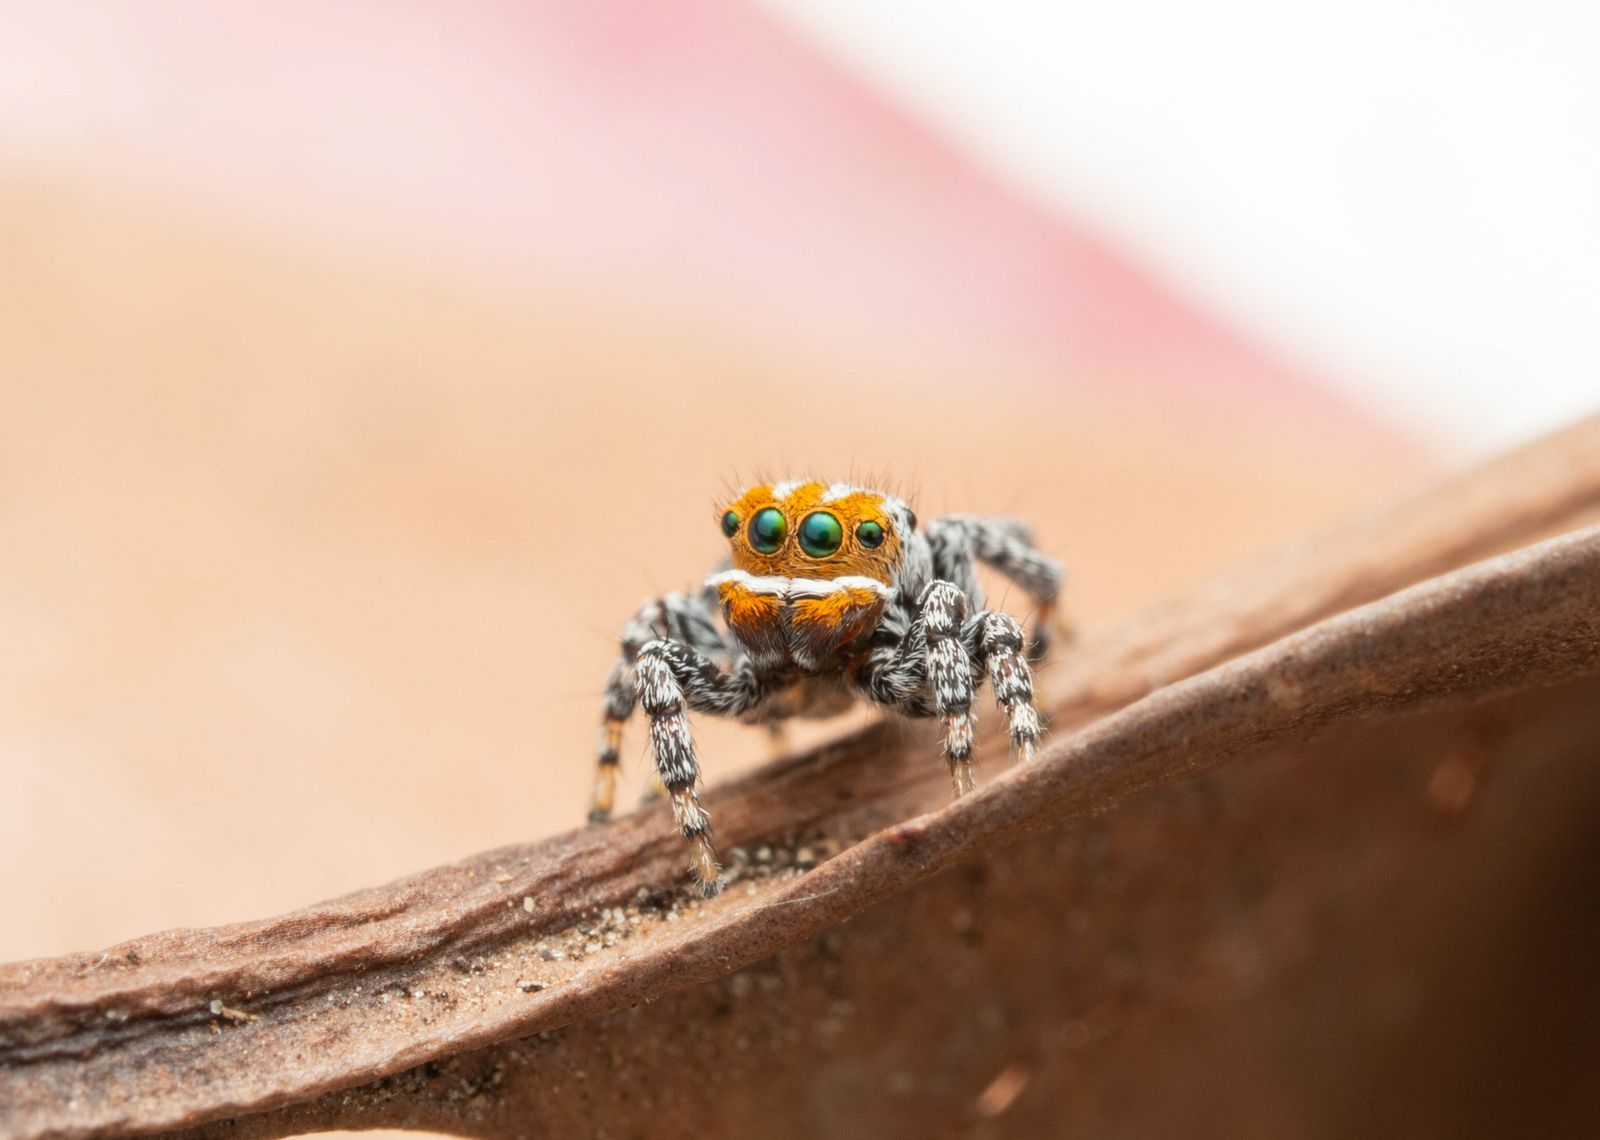 The newest peacock spider in Australia is called Nemo